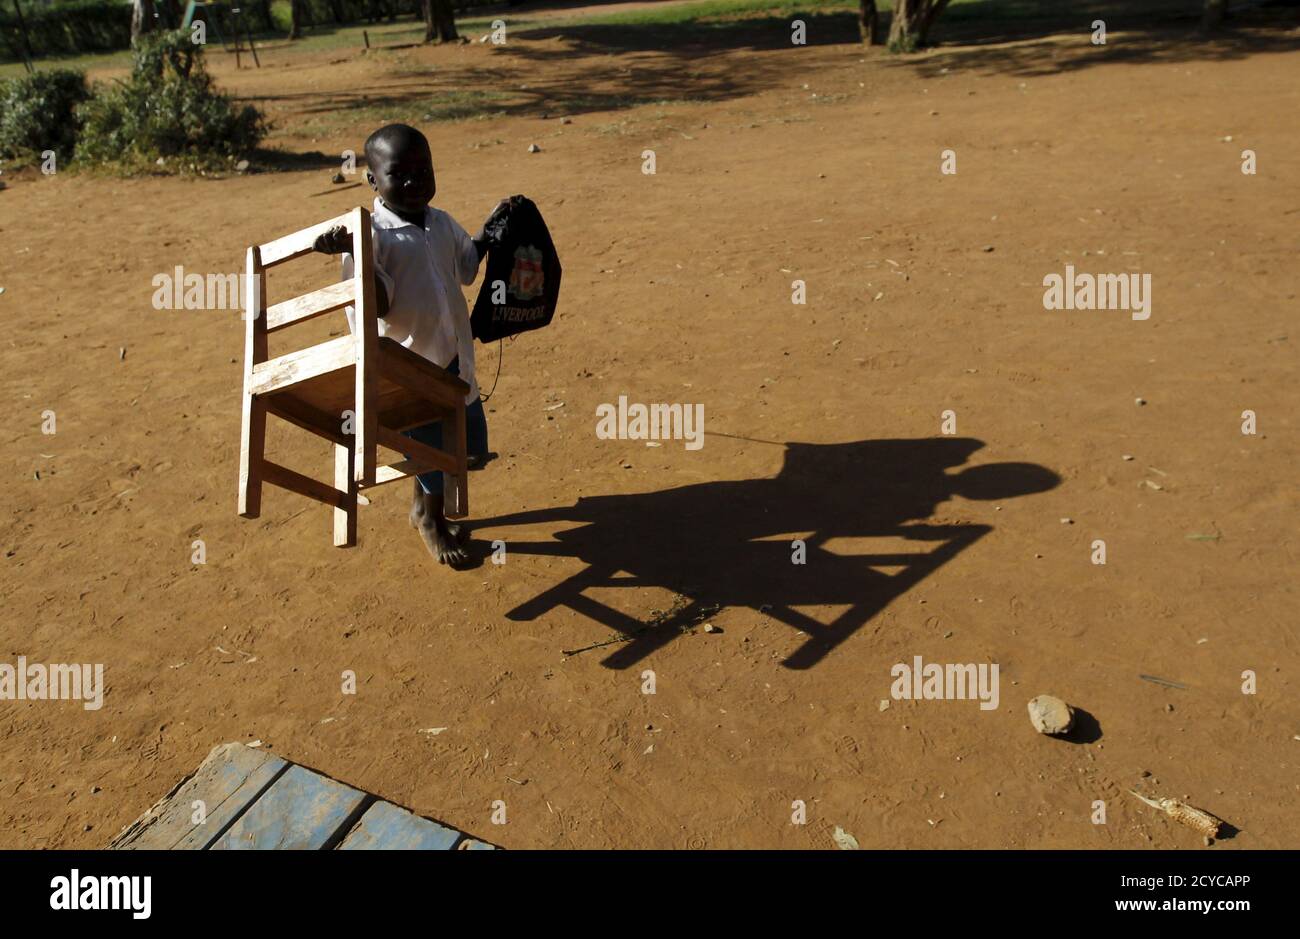 A boy carries a chair at the Senator Obama primary school in the U.S. President Barack Obama's ancestral village of Nyang'oma Kogelo, west of Kenya's capital Nairobi, July 16, 2015. Obama visits Kenya and Ethiopia in July, his third major trip to Sub-Saharan Africa after travelling to Ghana in 2009 and to Tanzania, Senegal and South Africa in 2011. He has also visited Egypt, in North Africa, and South Africa for Nelson Mandela's funeral. Obama will be welcomed by a continent that had expected closer attention from a man they claim as their son, a sentiment felt acutely in the Kenyan village wh Stock Photo